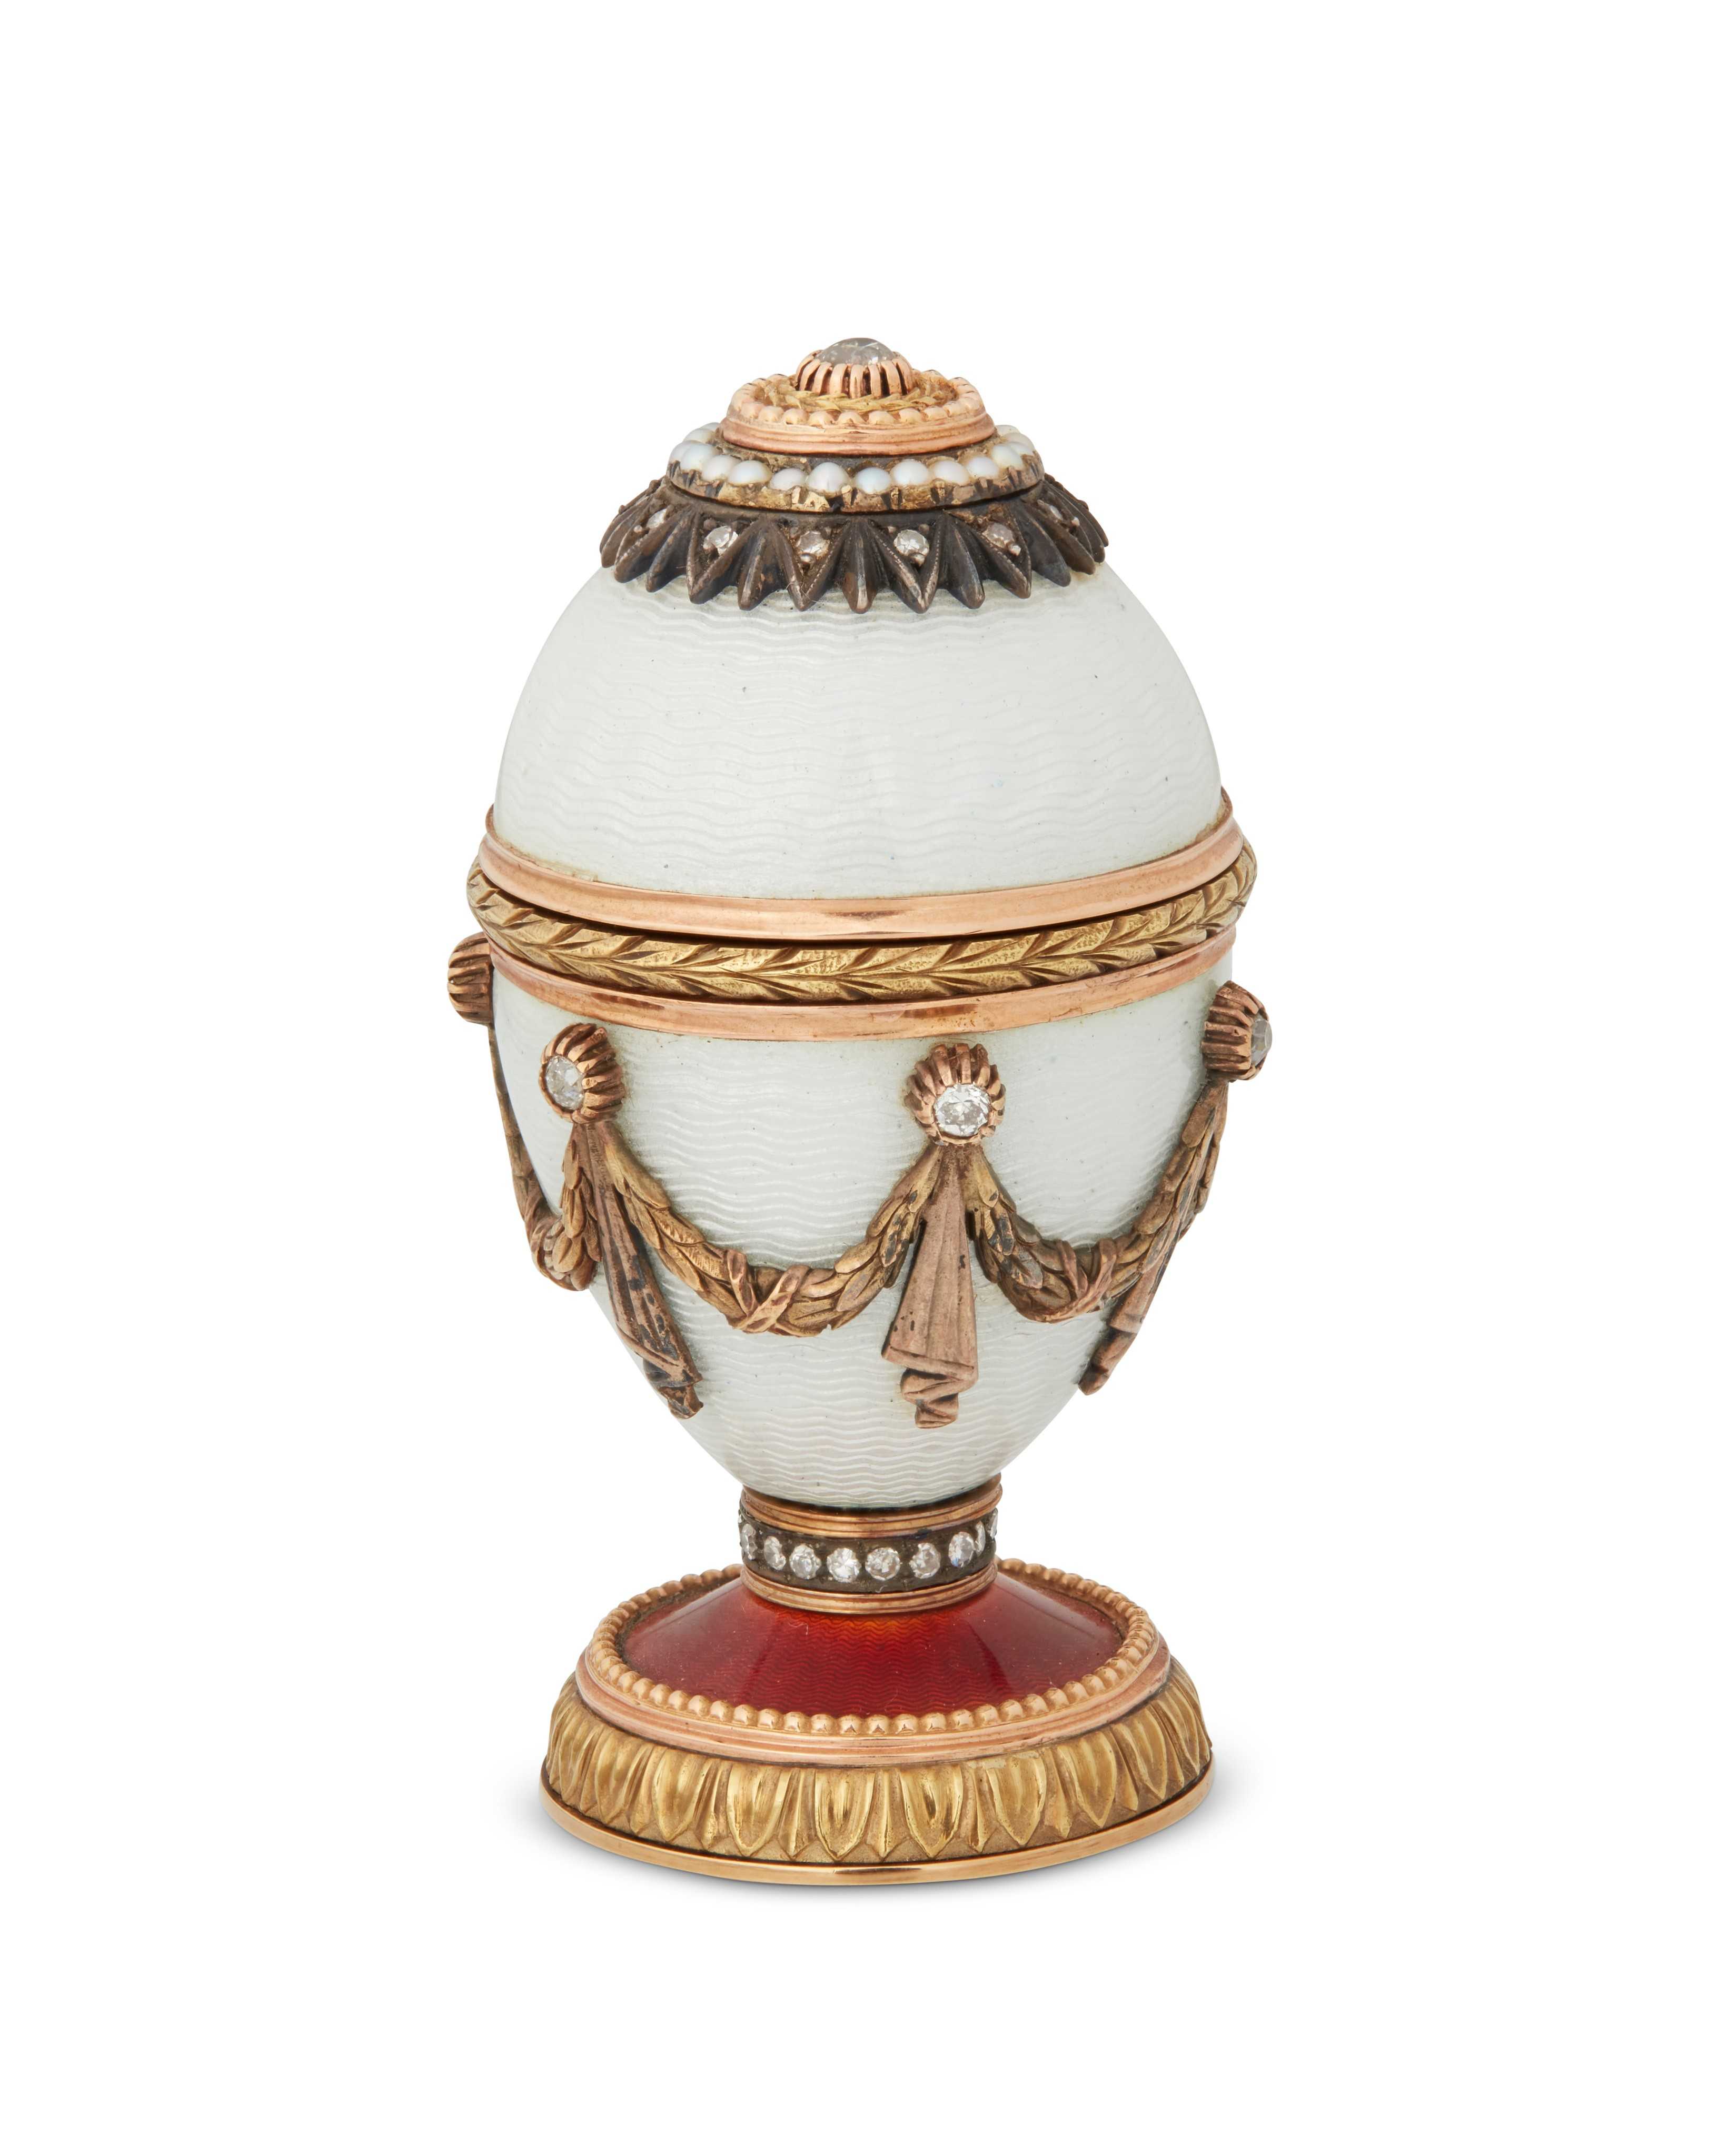 Fabergé jeweled and enameled silver and gold egg by Michael Perchin, estimated at $12,000-$18,000 at Moran.